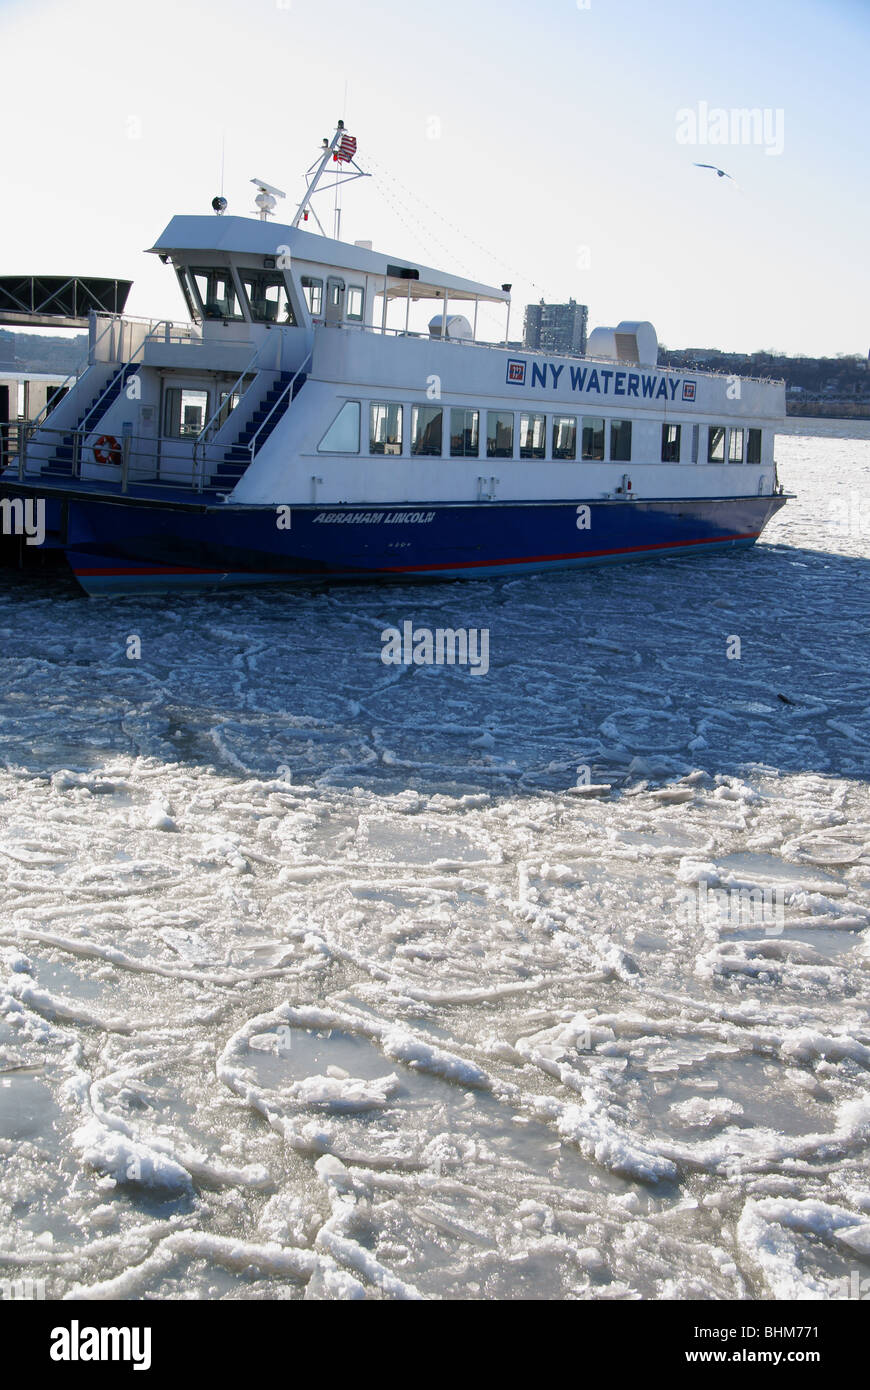 NY Waterway ferries operate in freezing temperatures on icy Hudson river Stock Photo